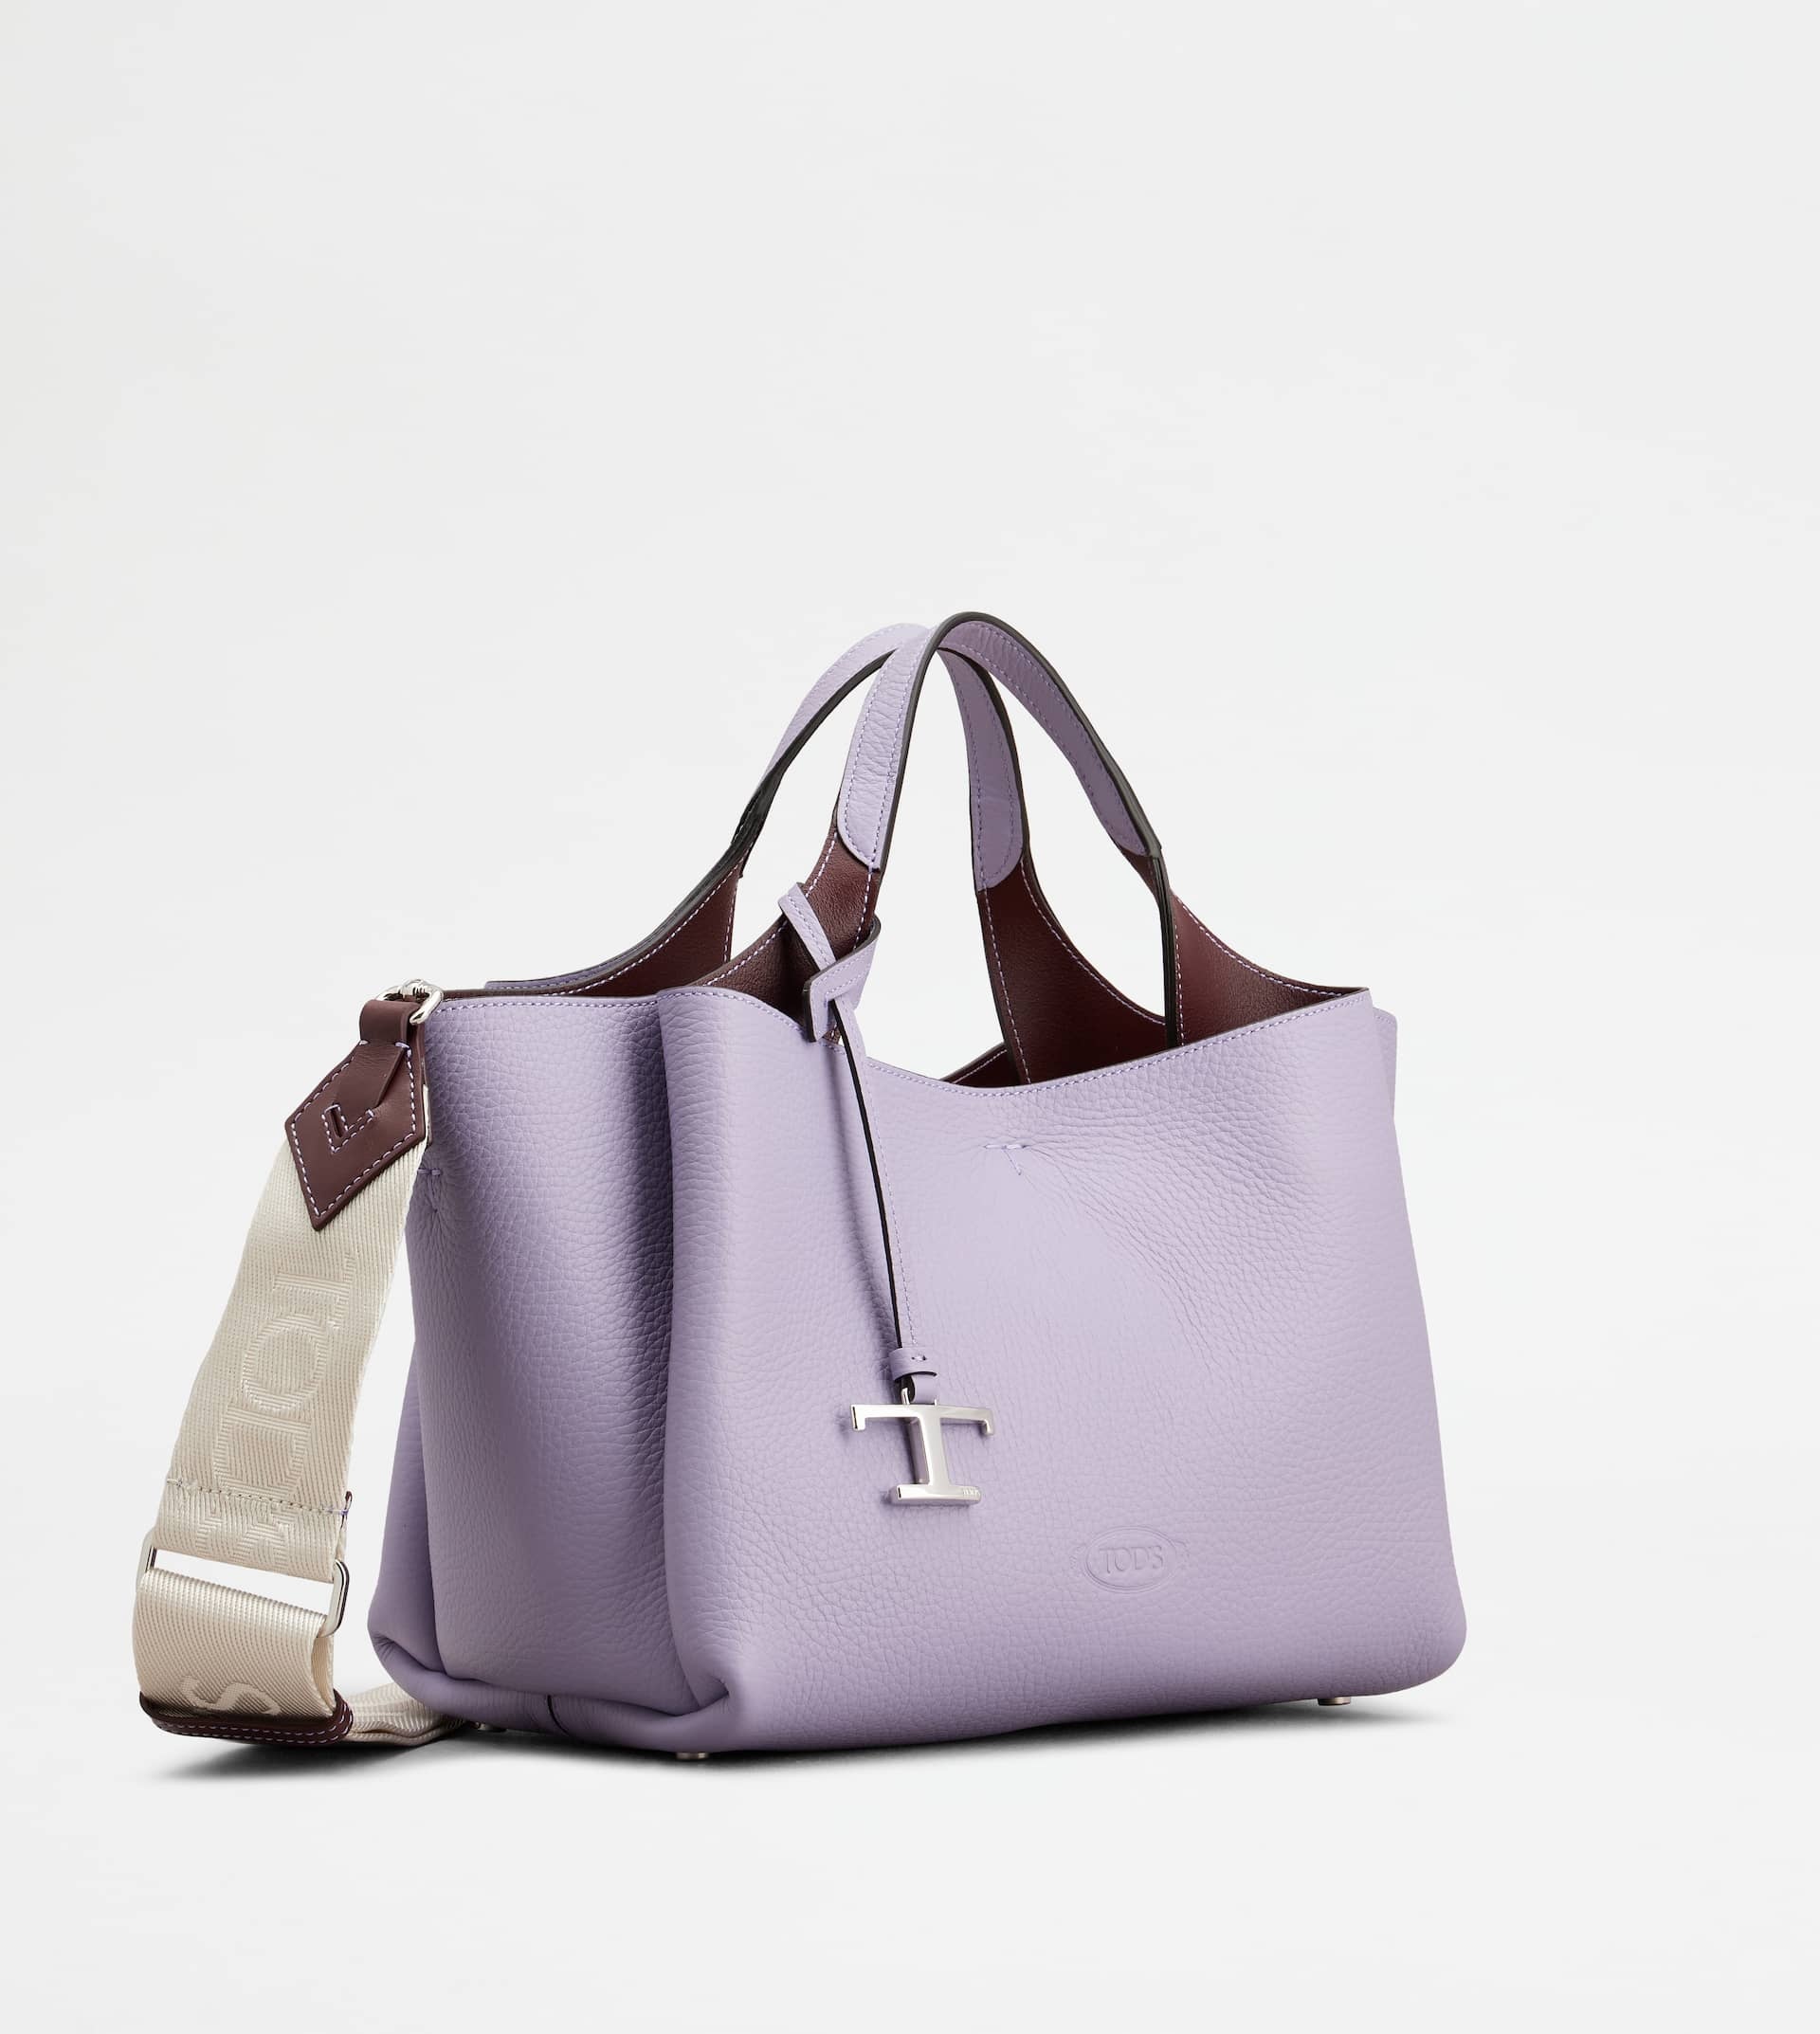 BAG IN LEATHER MICRO - VIOLET - 2